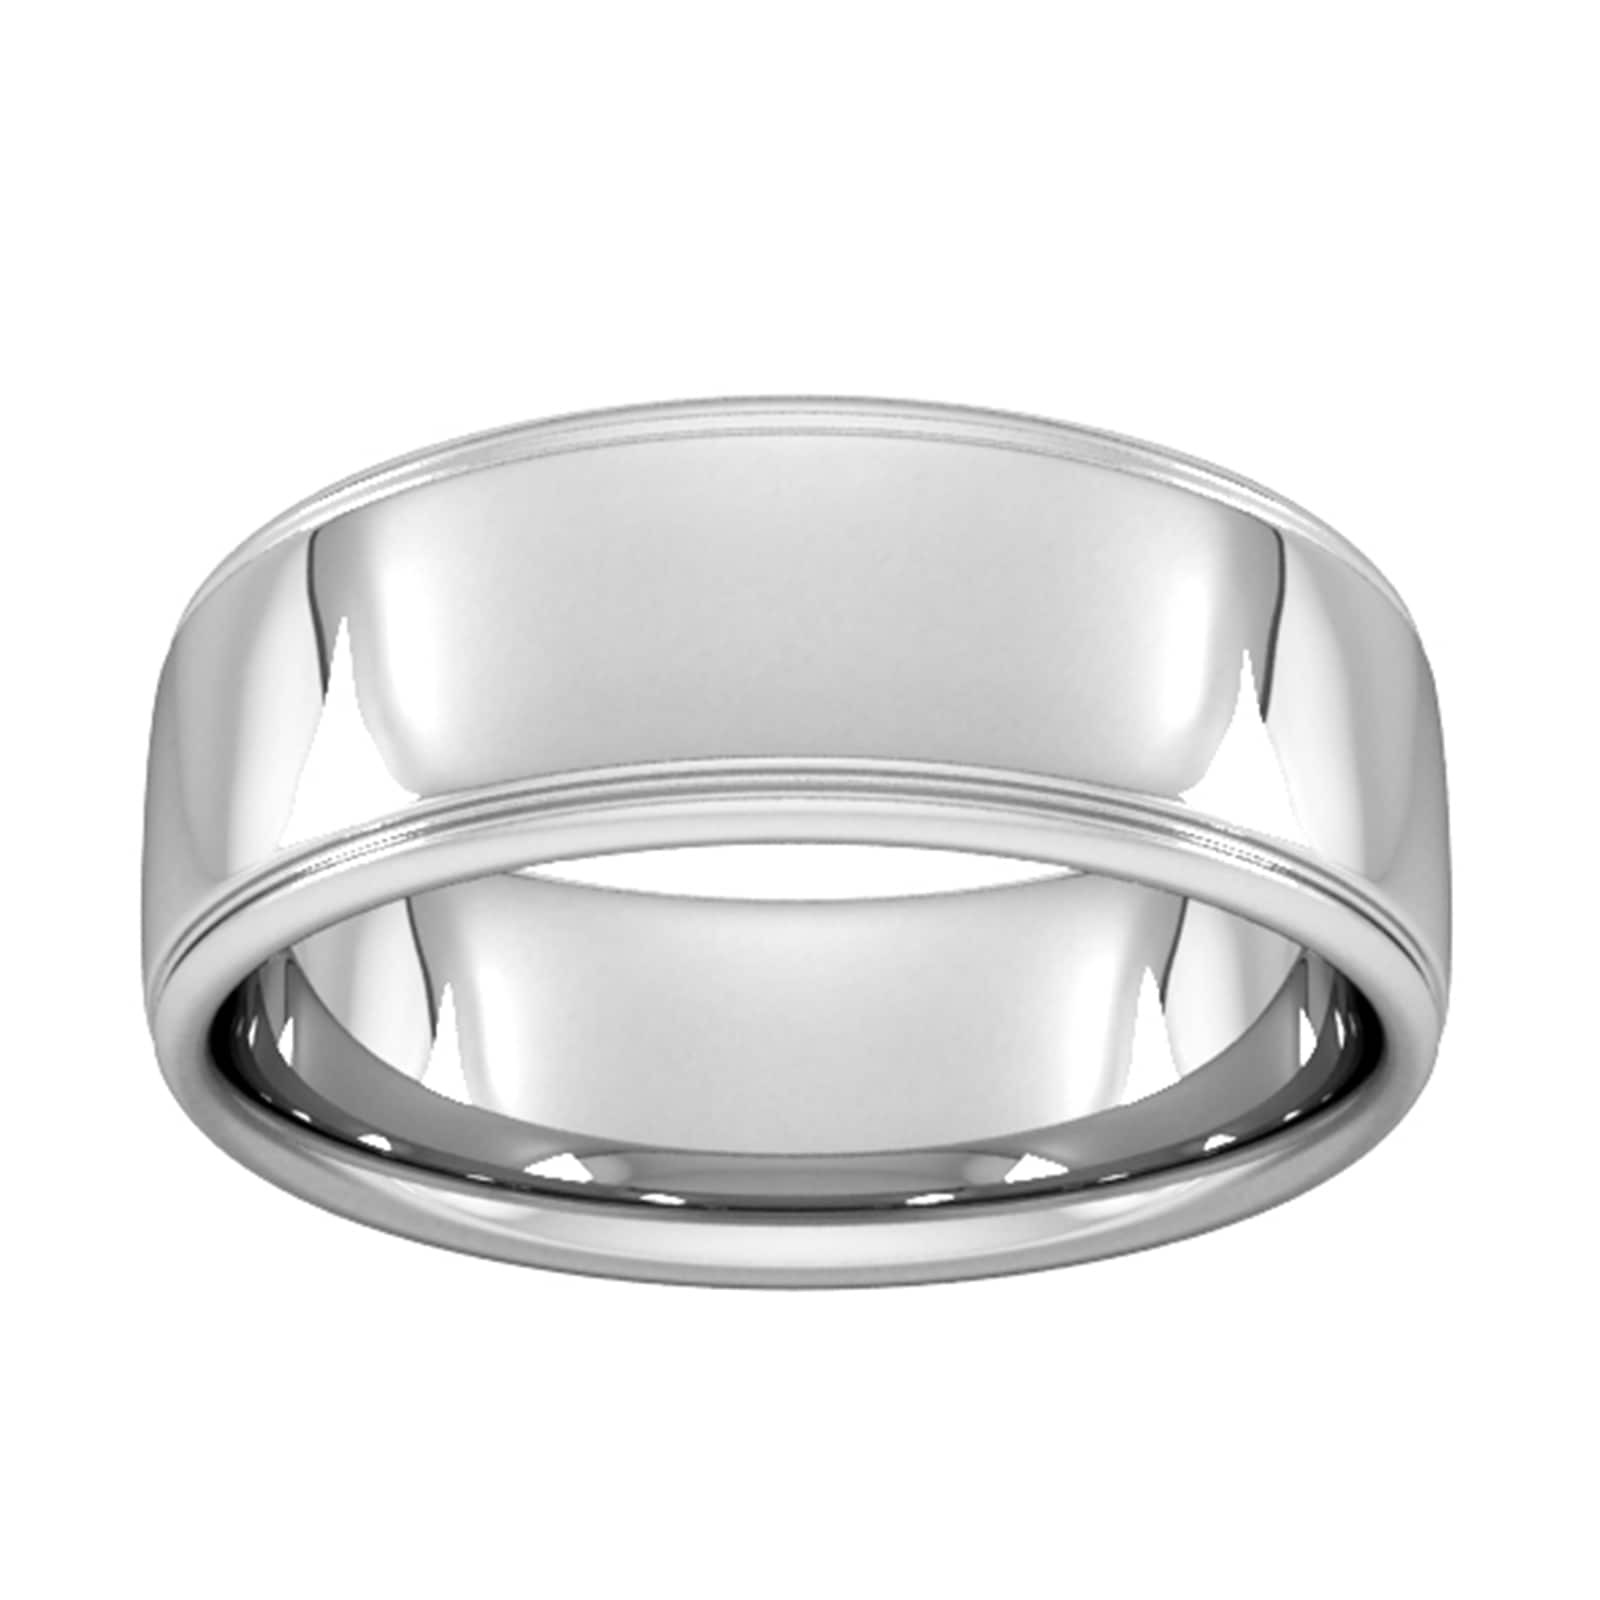 8mm Slight Court Standard Polished Finish With Grooves Wedding Ring In 18 Carat White Gold - Ring Size G